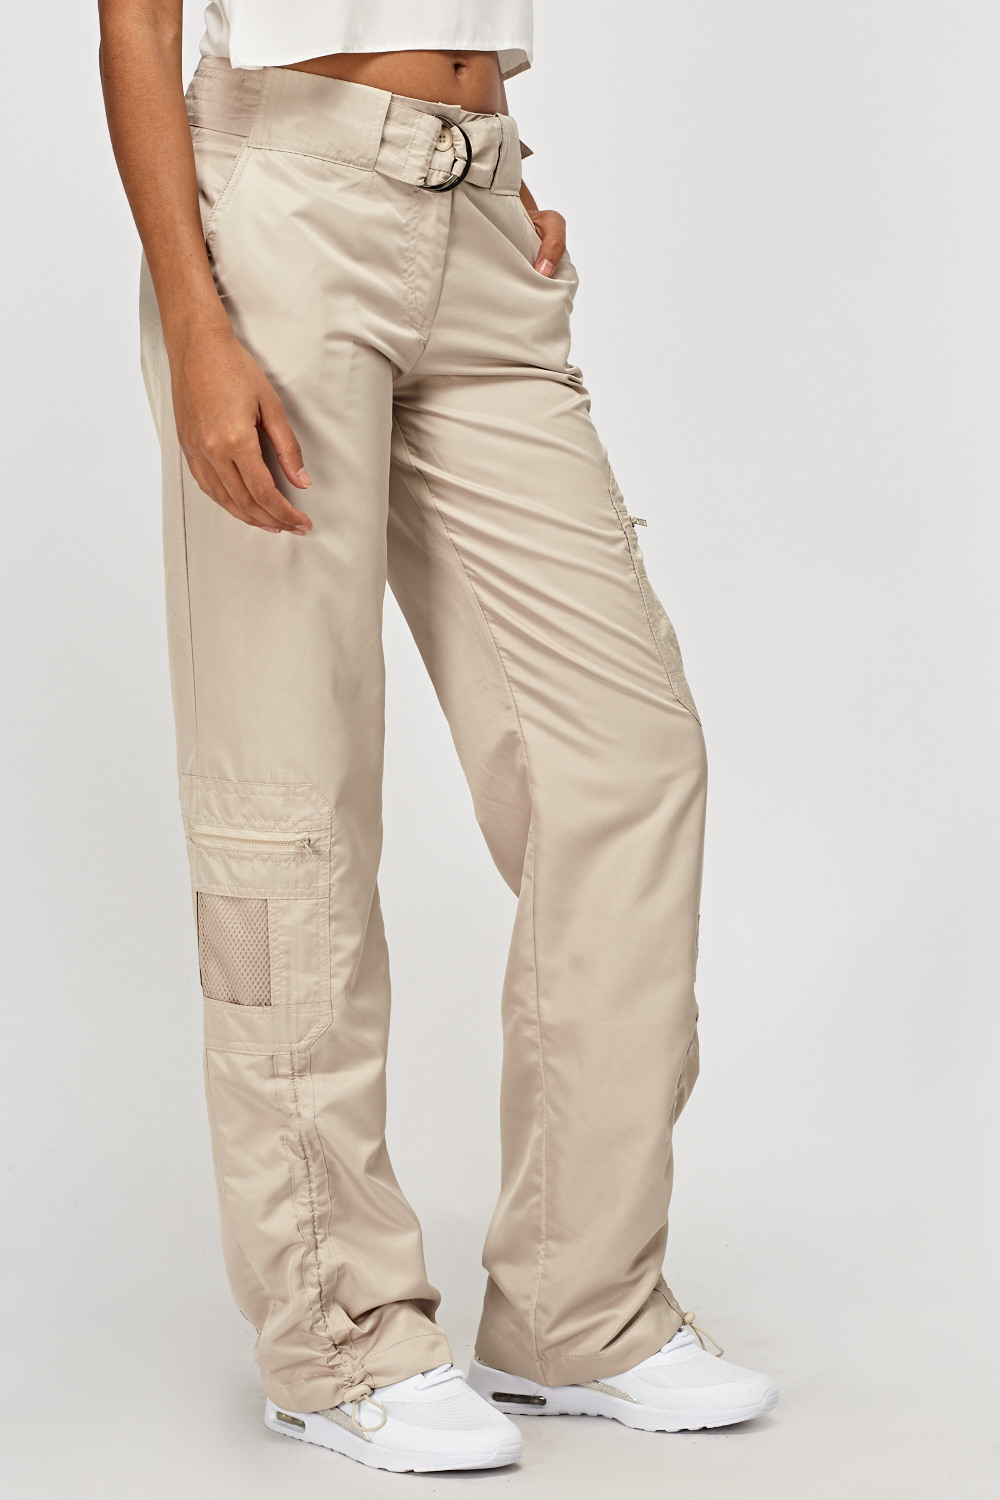 Sand Combat Trousers - Just $6